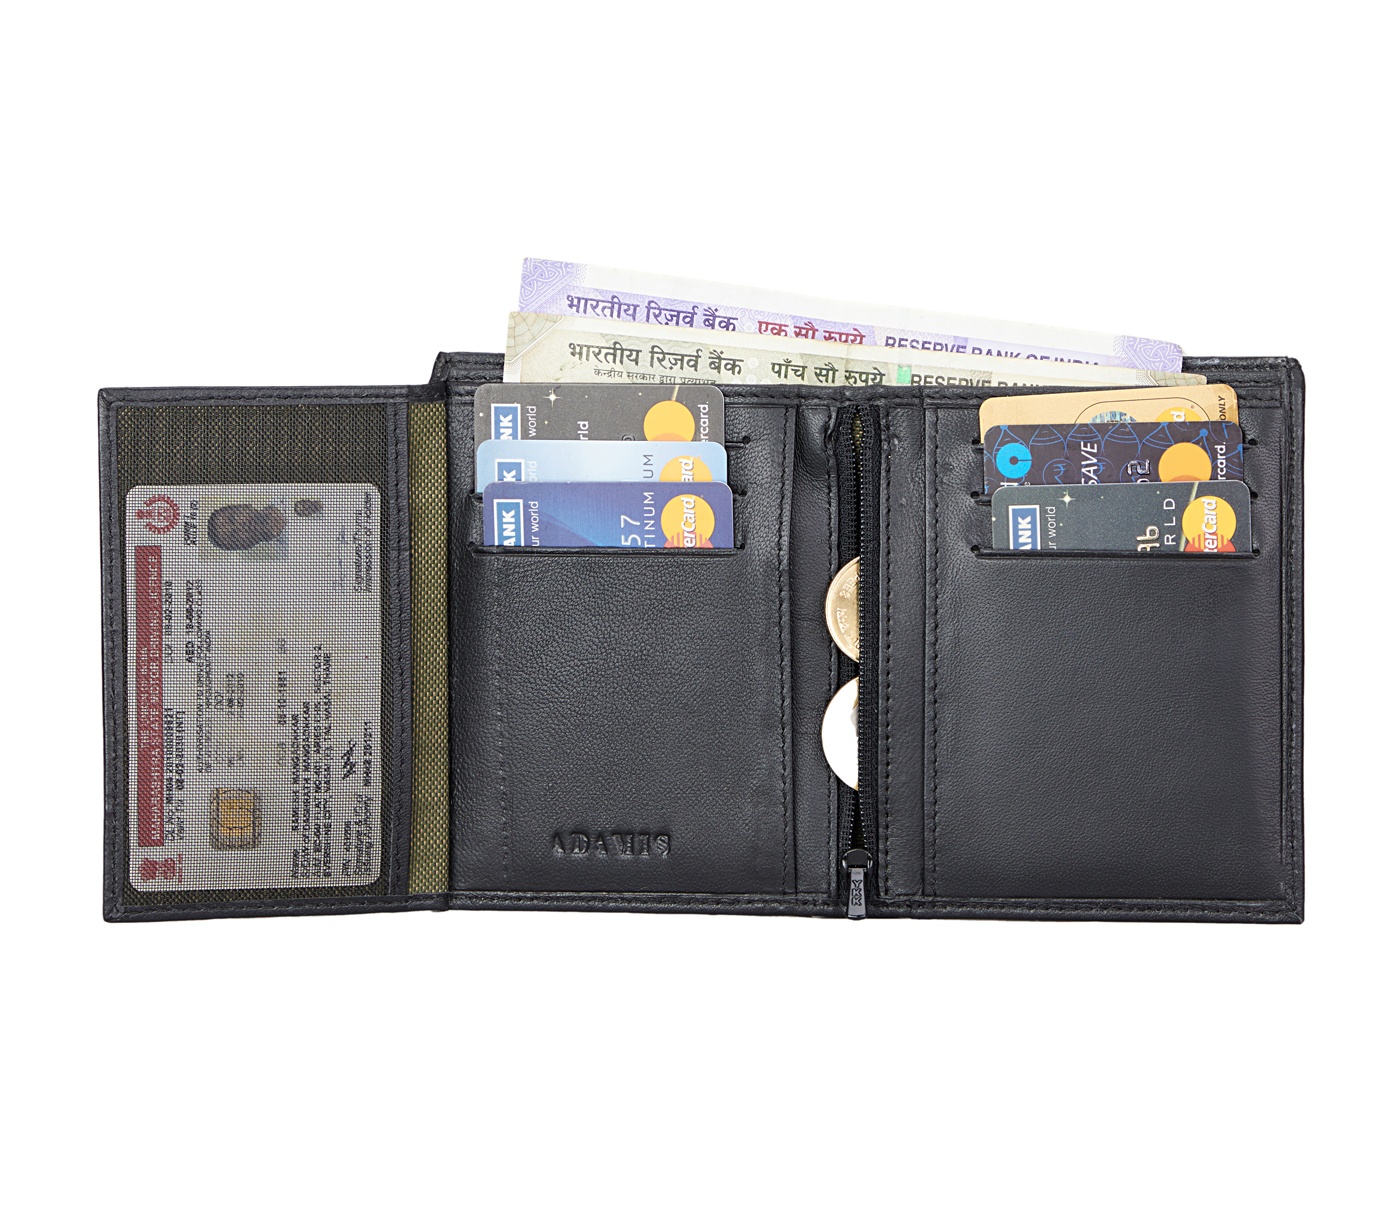 W7-Davide-Men's Bifold Wallet With Photo Id In Genuine Leather - Black